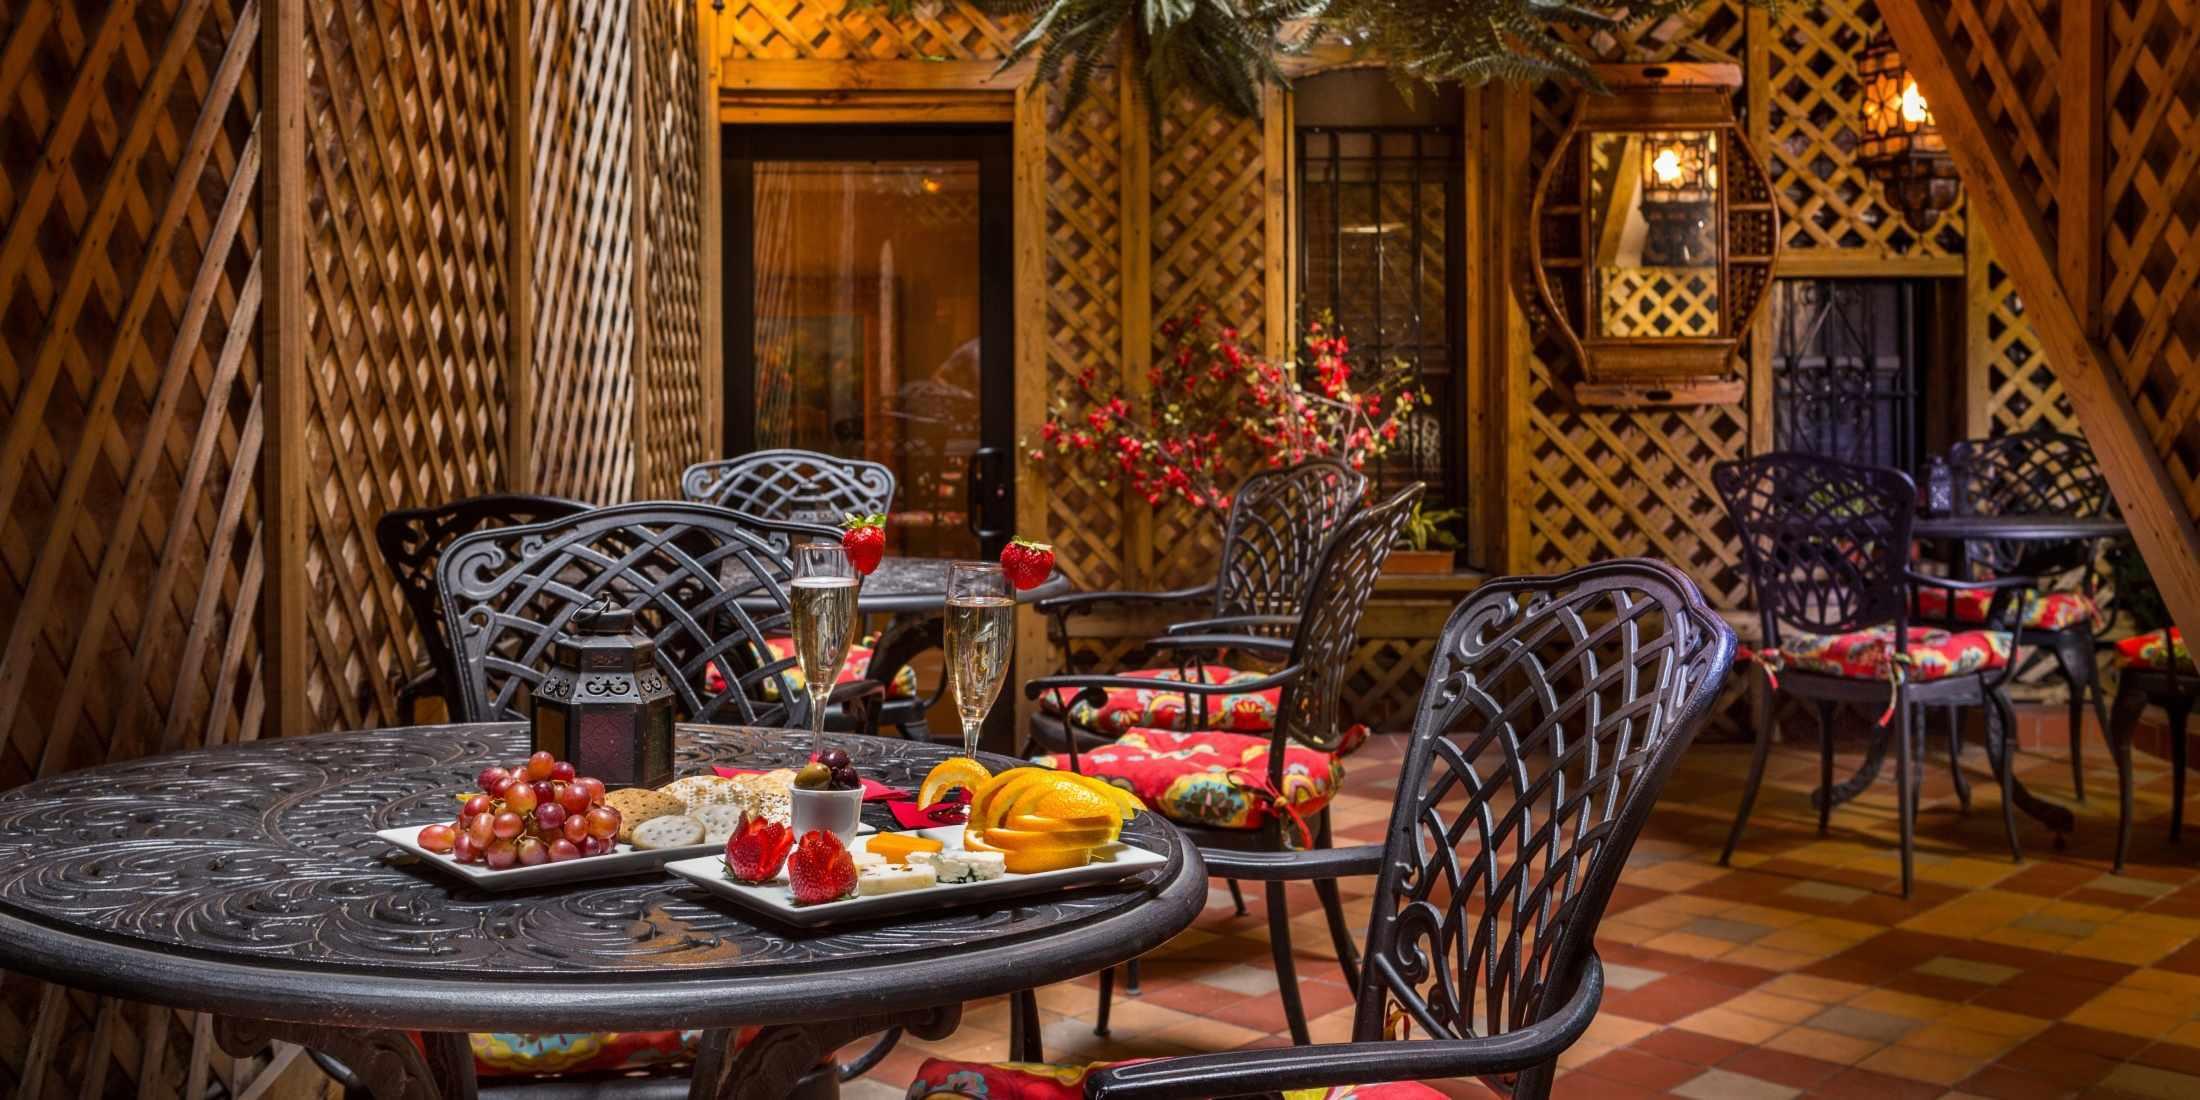 On warmer days, guests are invited to enjoy our complimentary Wine & Cheese Reception in our Blue Parrot Courtyard!